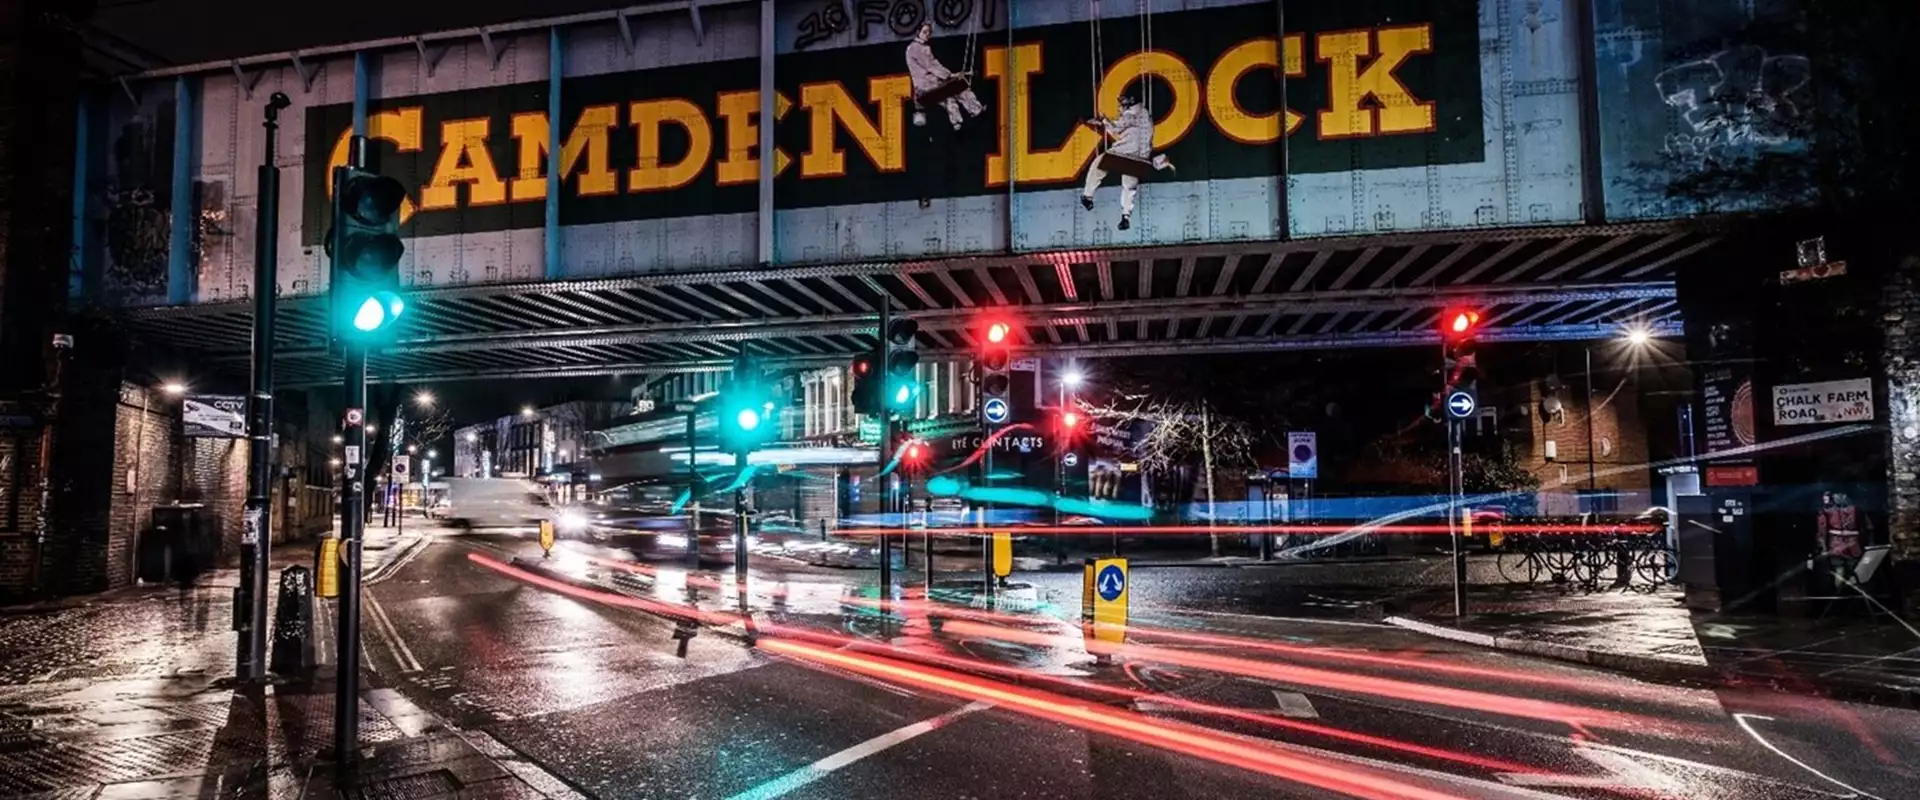 5 Reasons your business should be based in Camden - camden-banner